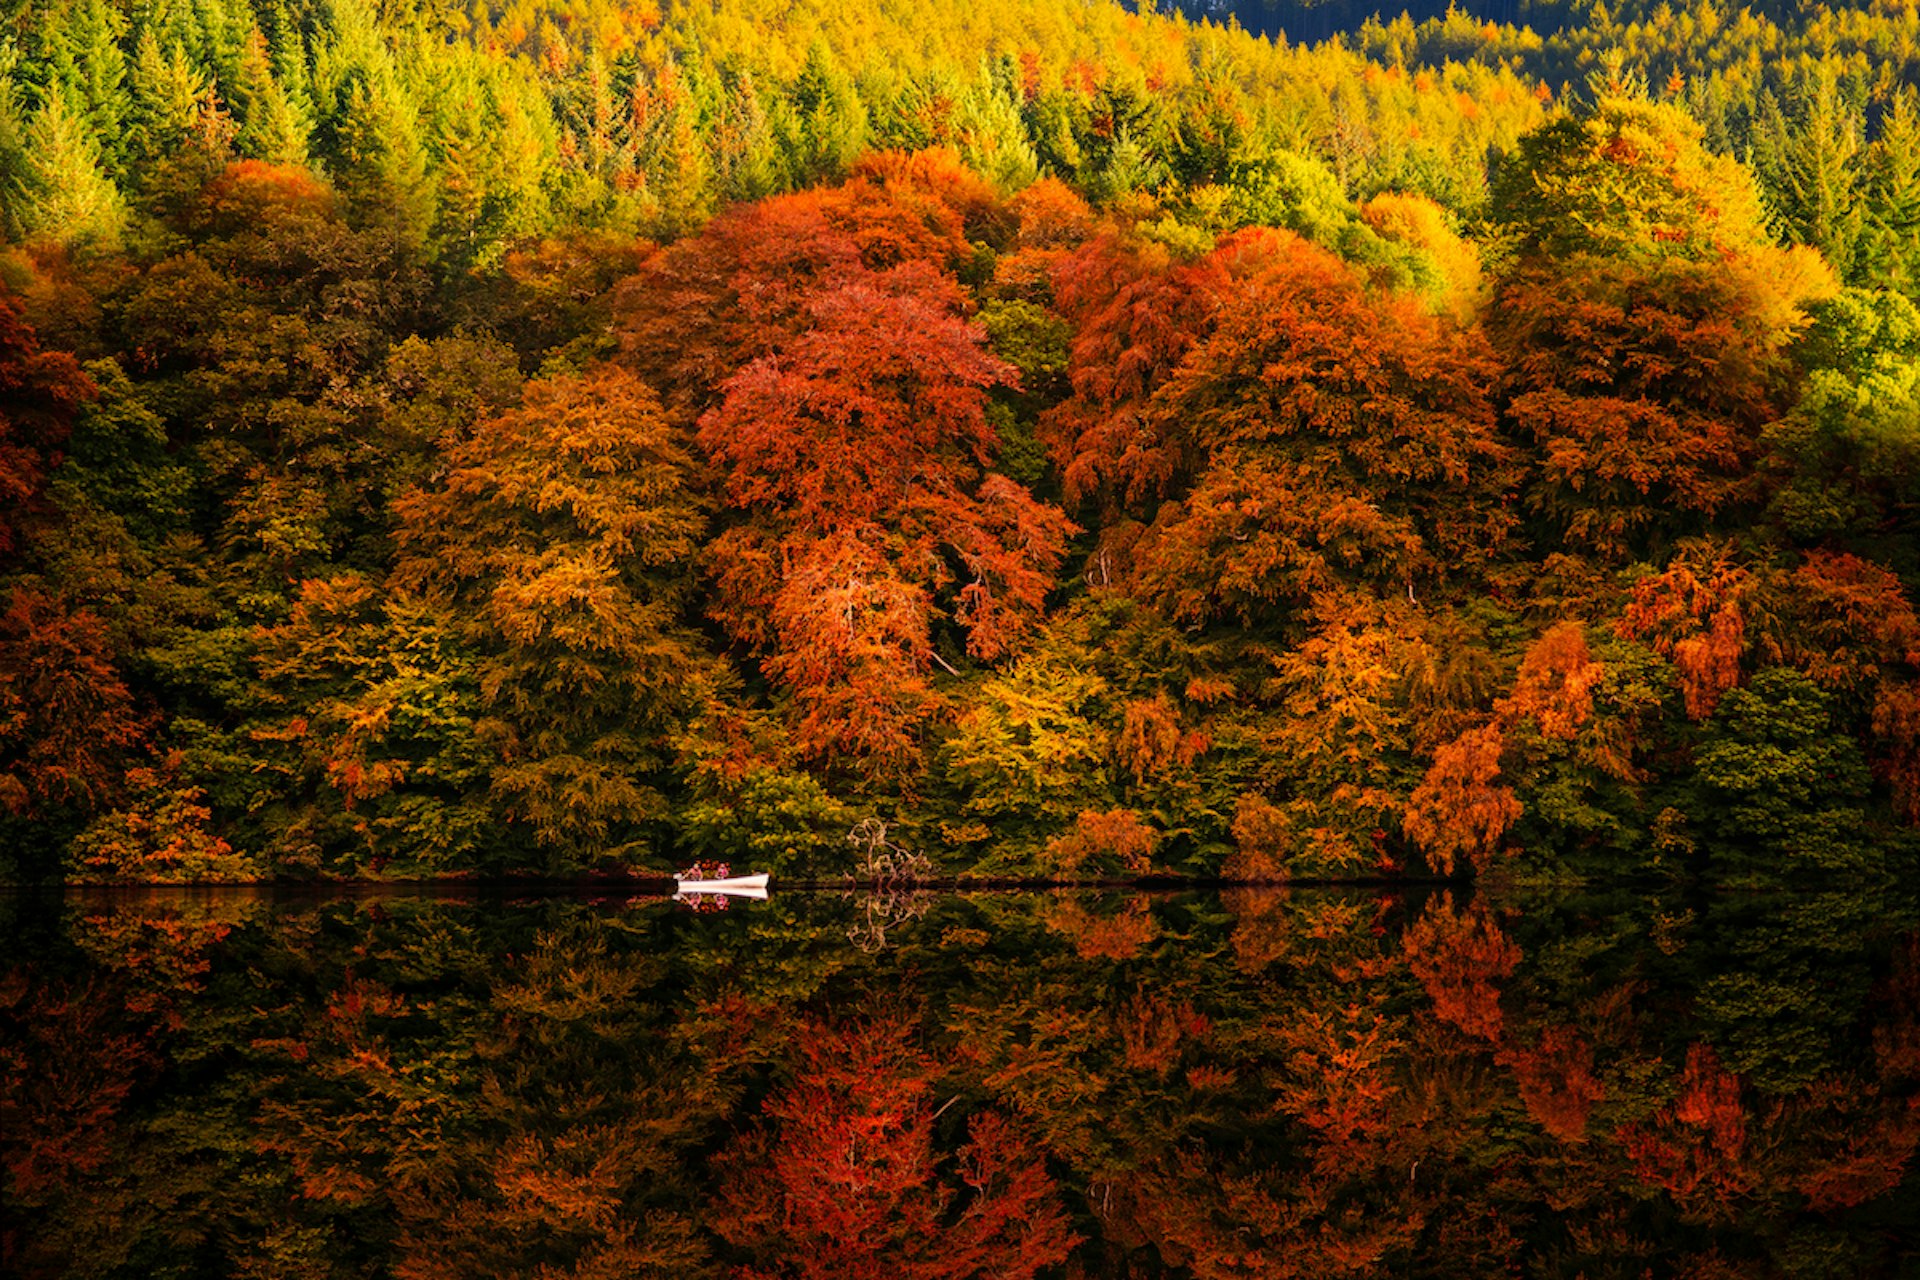 A rowboat on Loch Faskally next to trees with fall foliage reflected in the water, Pitlochry, Perthshire, Scotland, United Kingdom